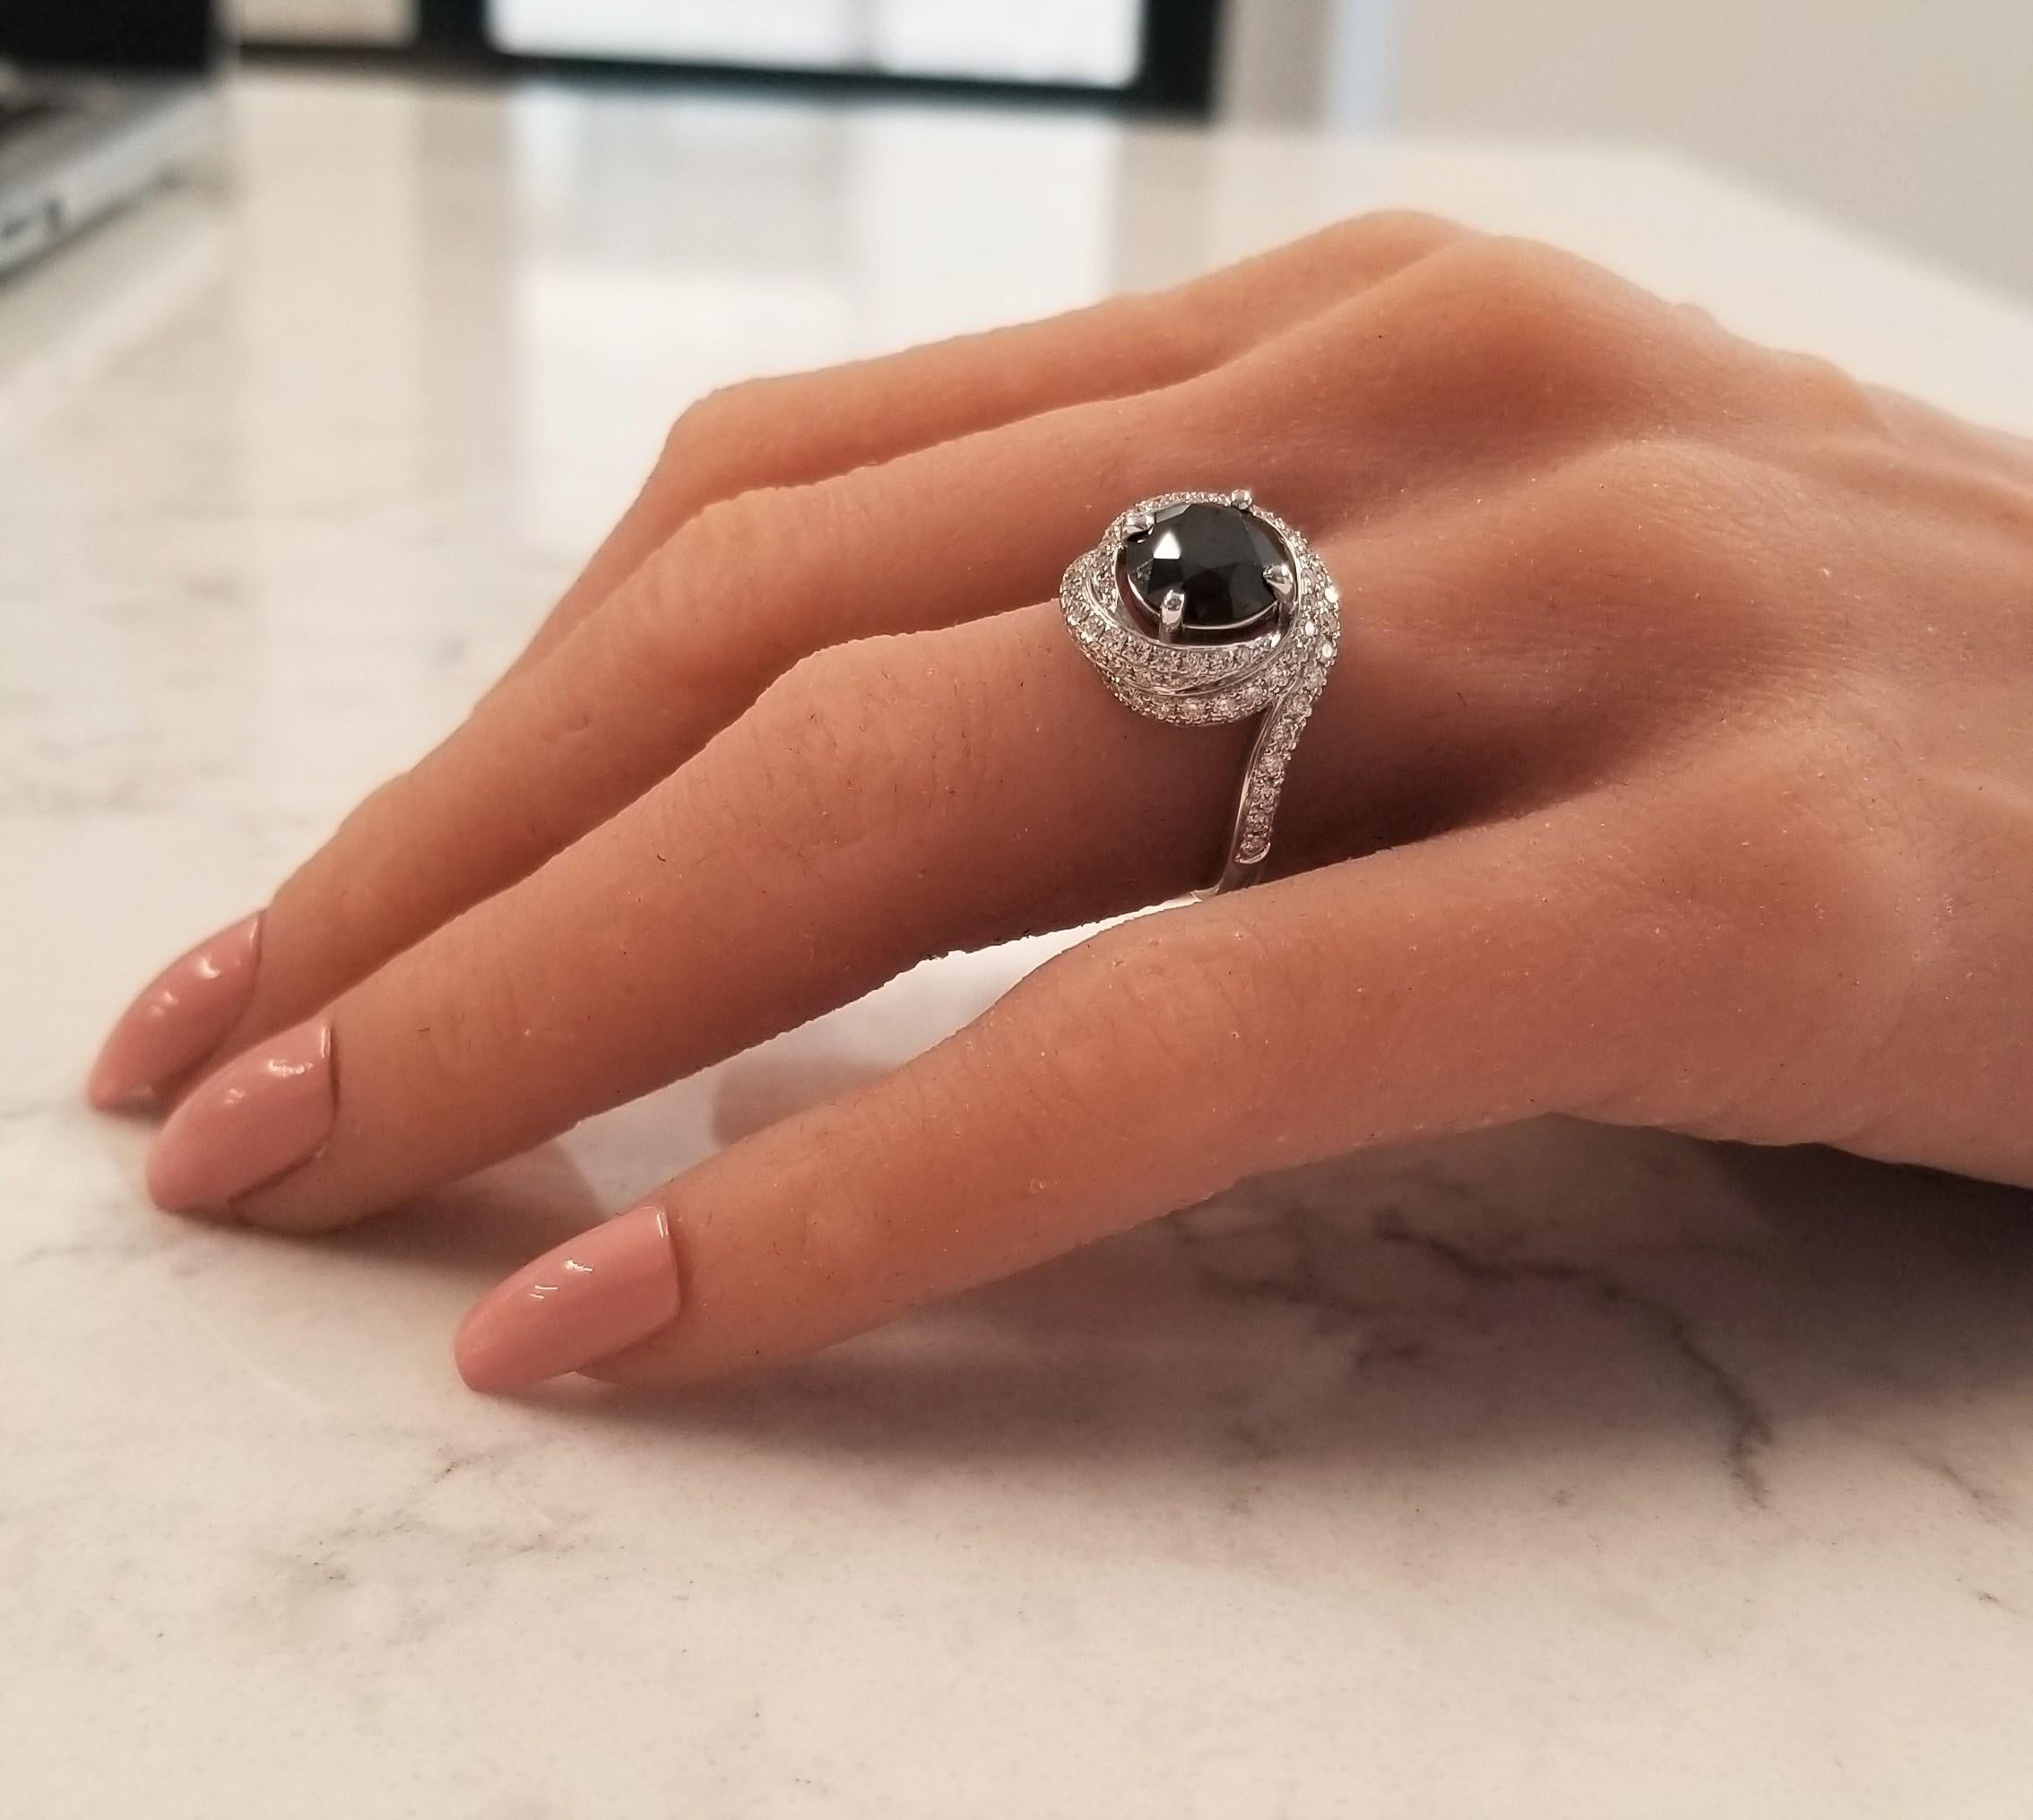 This is a picture perfect black and white combination like the keys on a Steinway piano. This ring features a 2.92 carat round black diamond. It measures 8.8mm. Its color is evenly distributed with excellent luster. The black diamond is swirled with